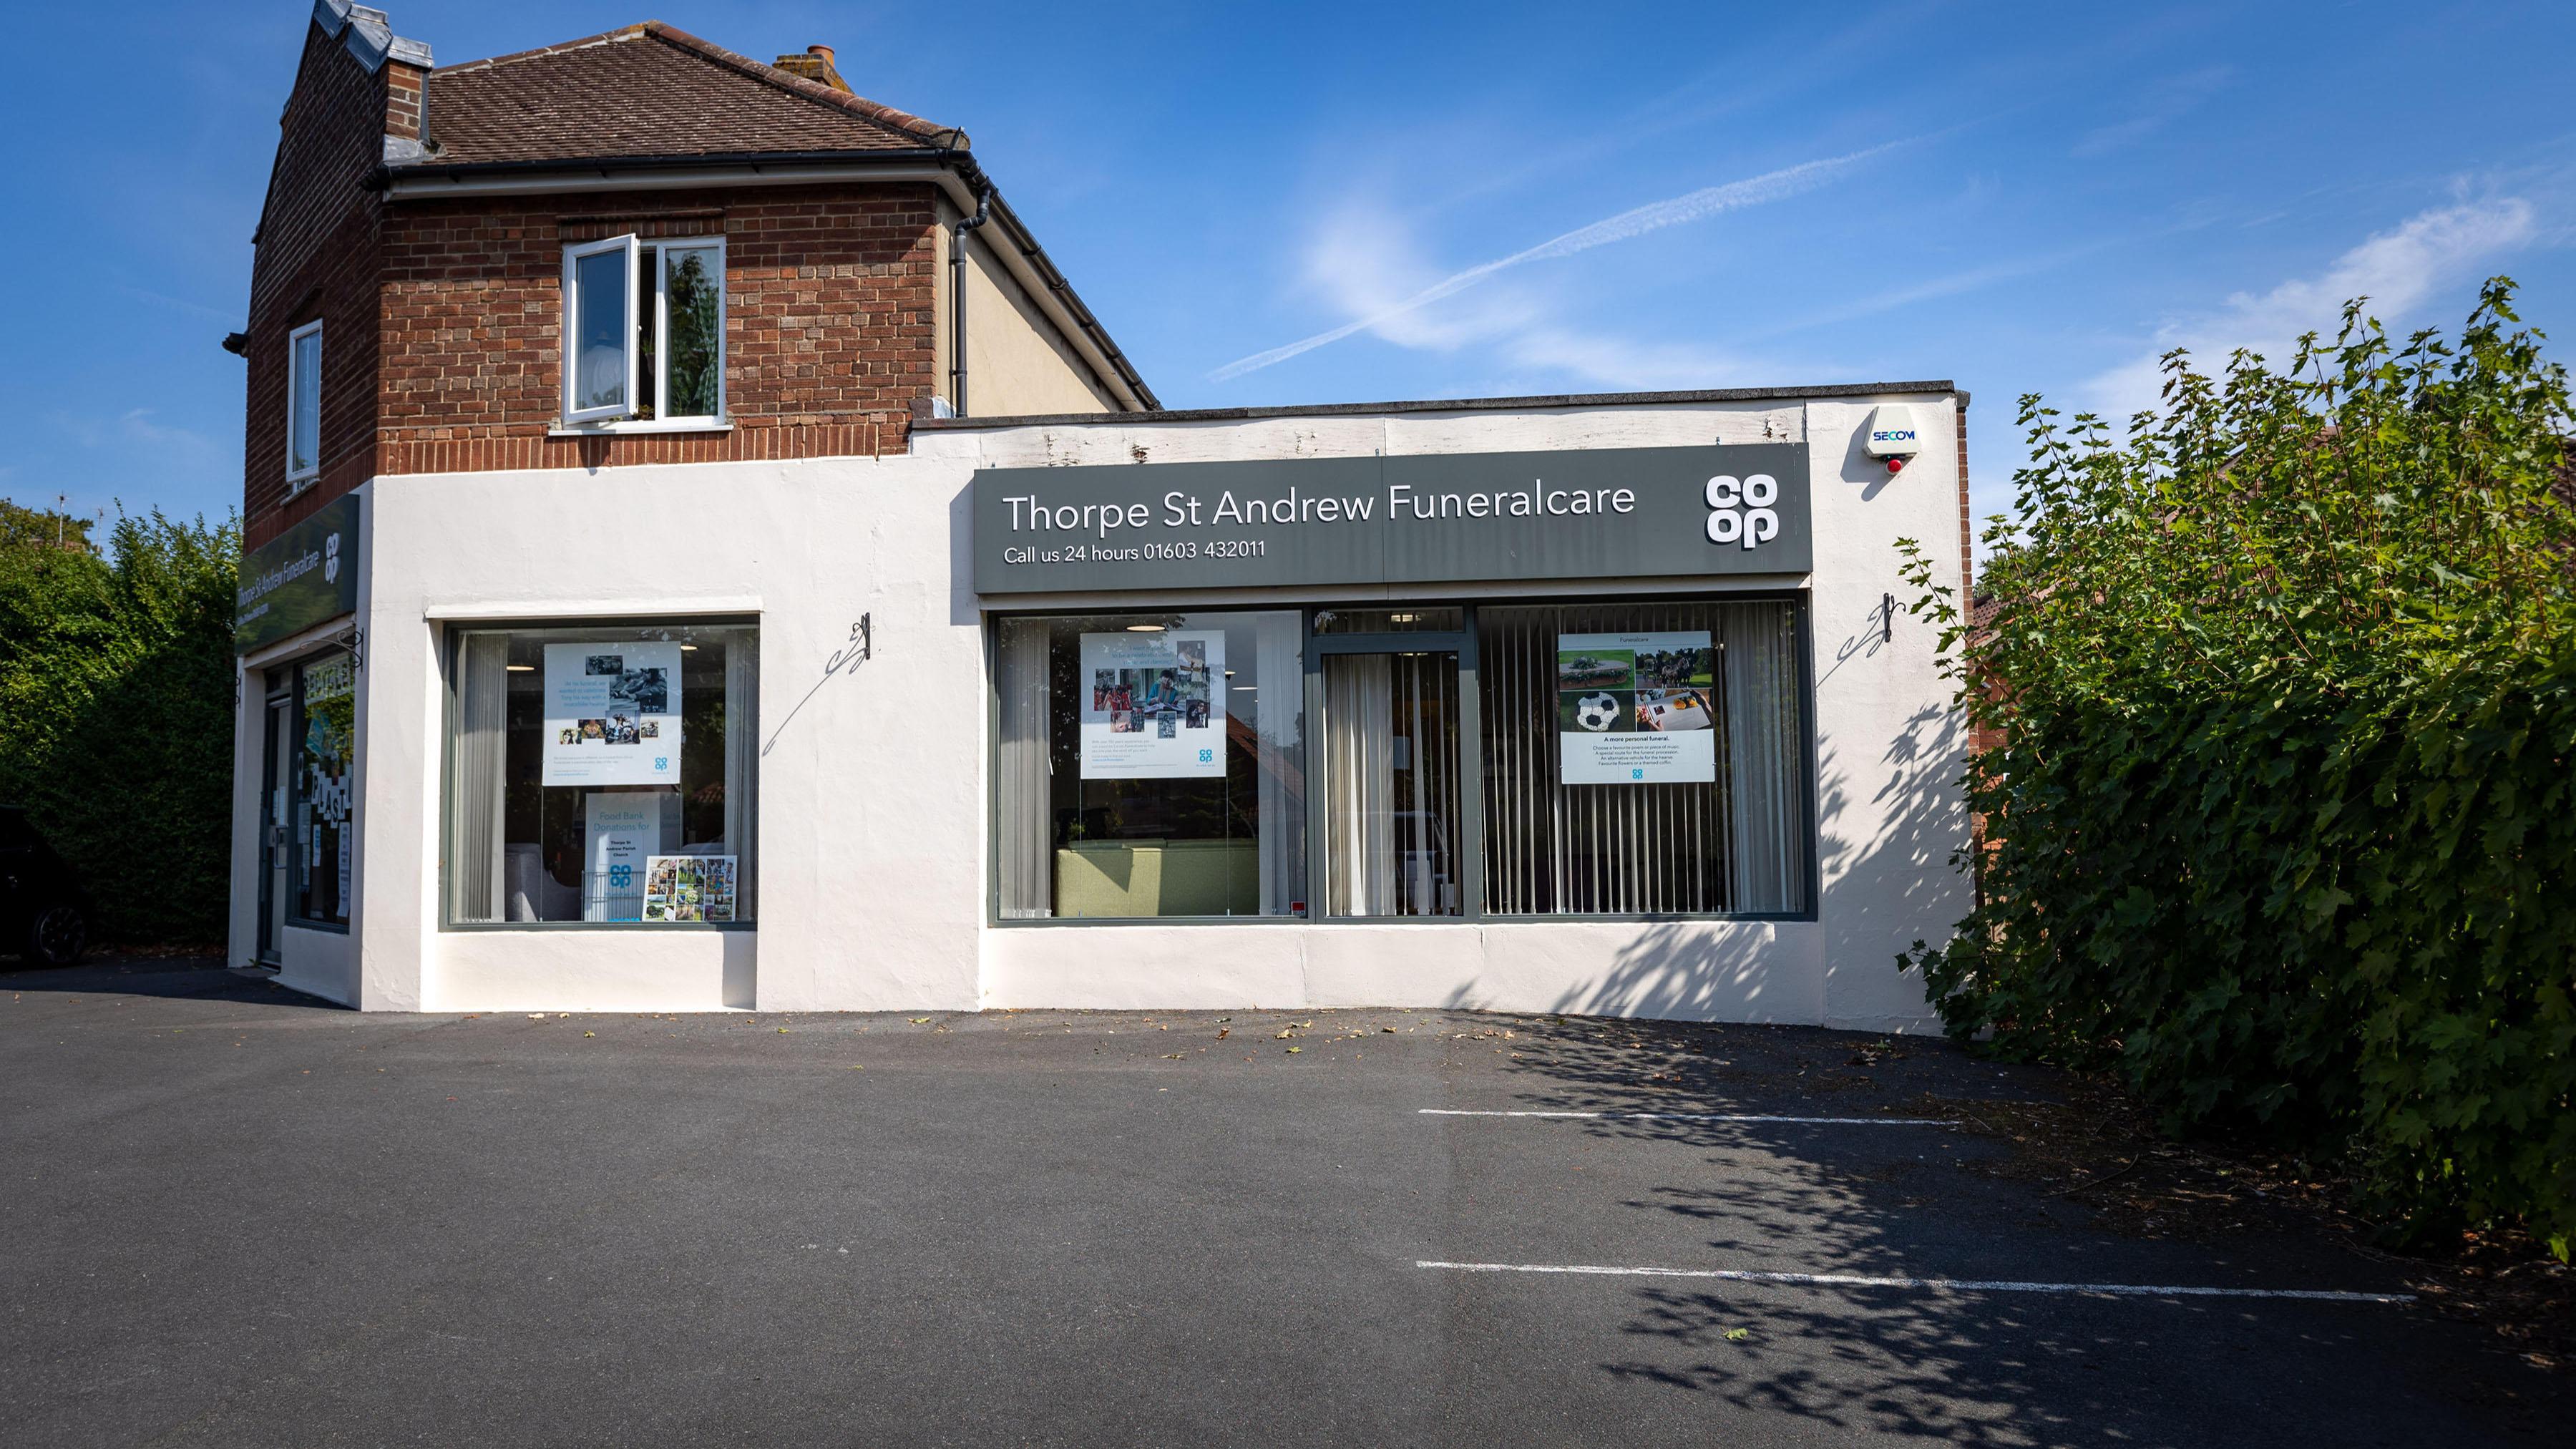 Images Thorpe St Andrew Funeralcare